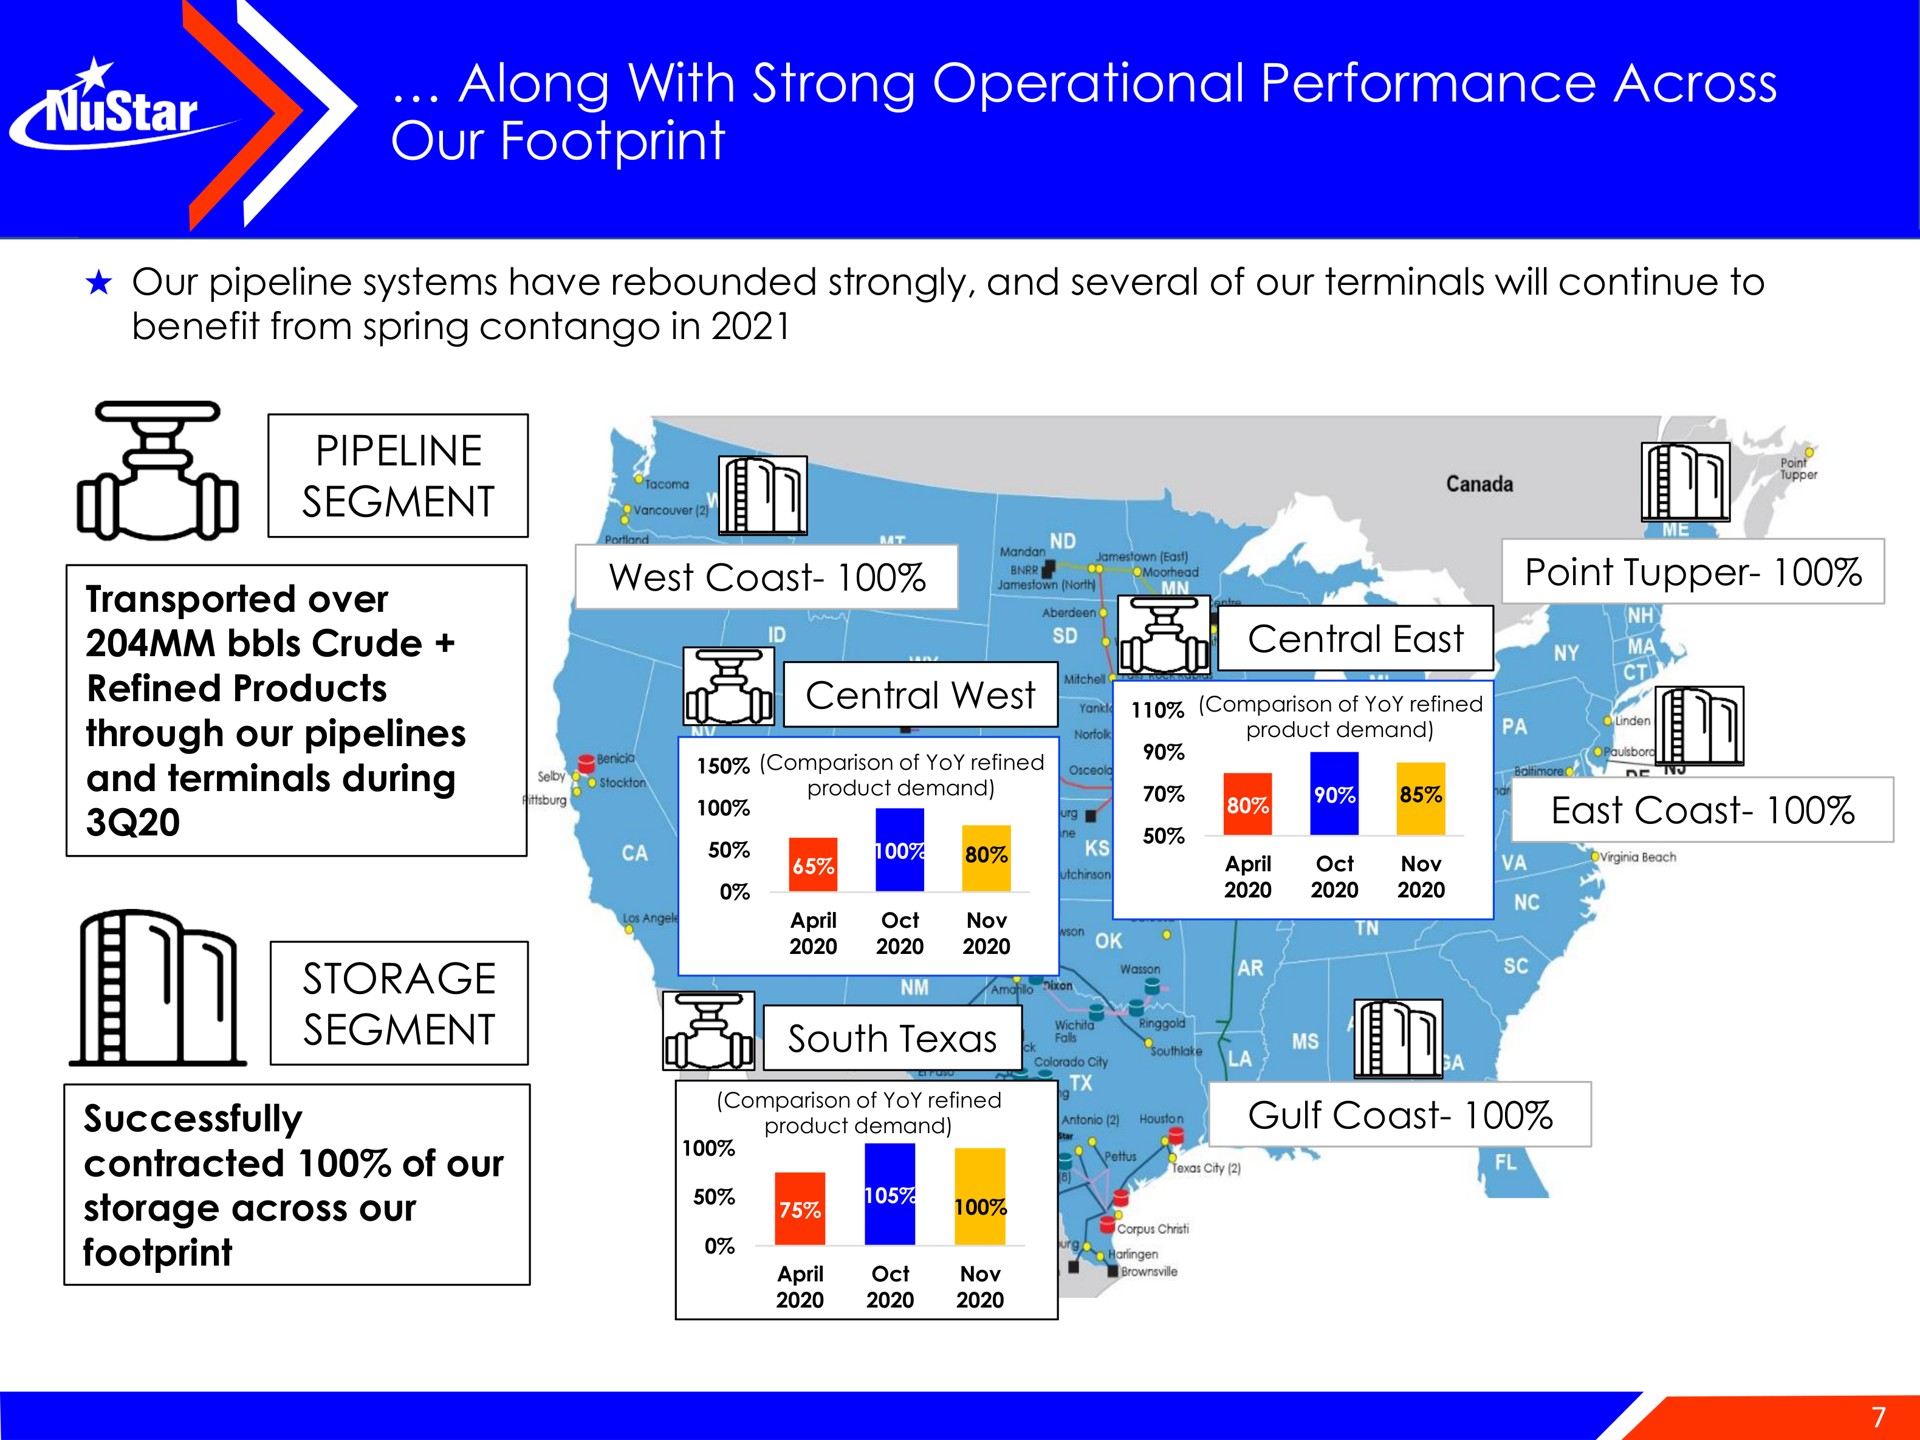 along with strong operational performance across our footprint | NuStar Energy